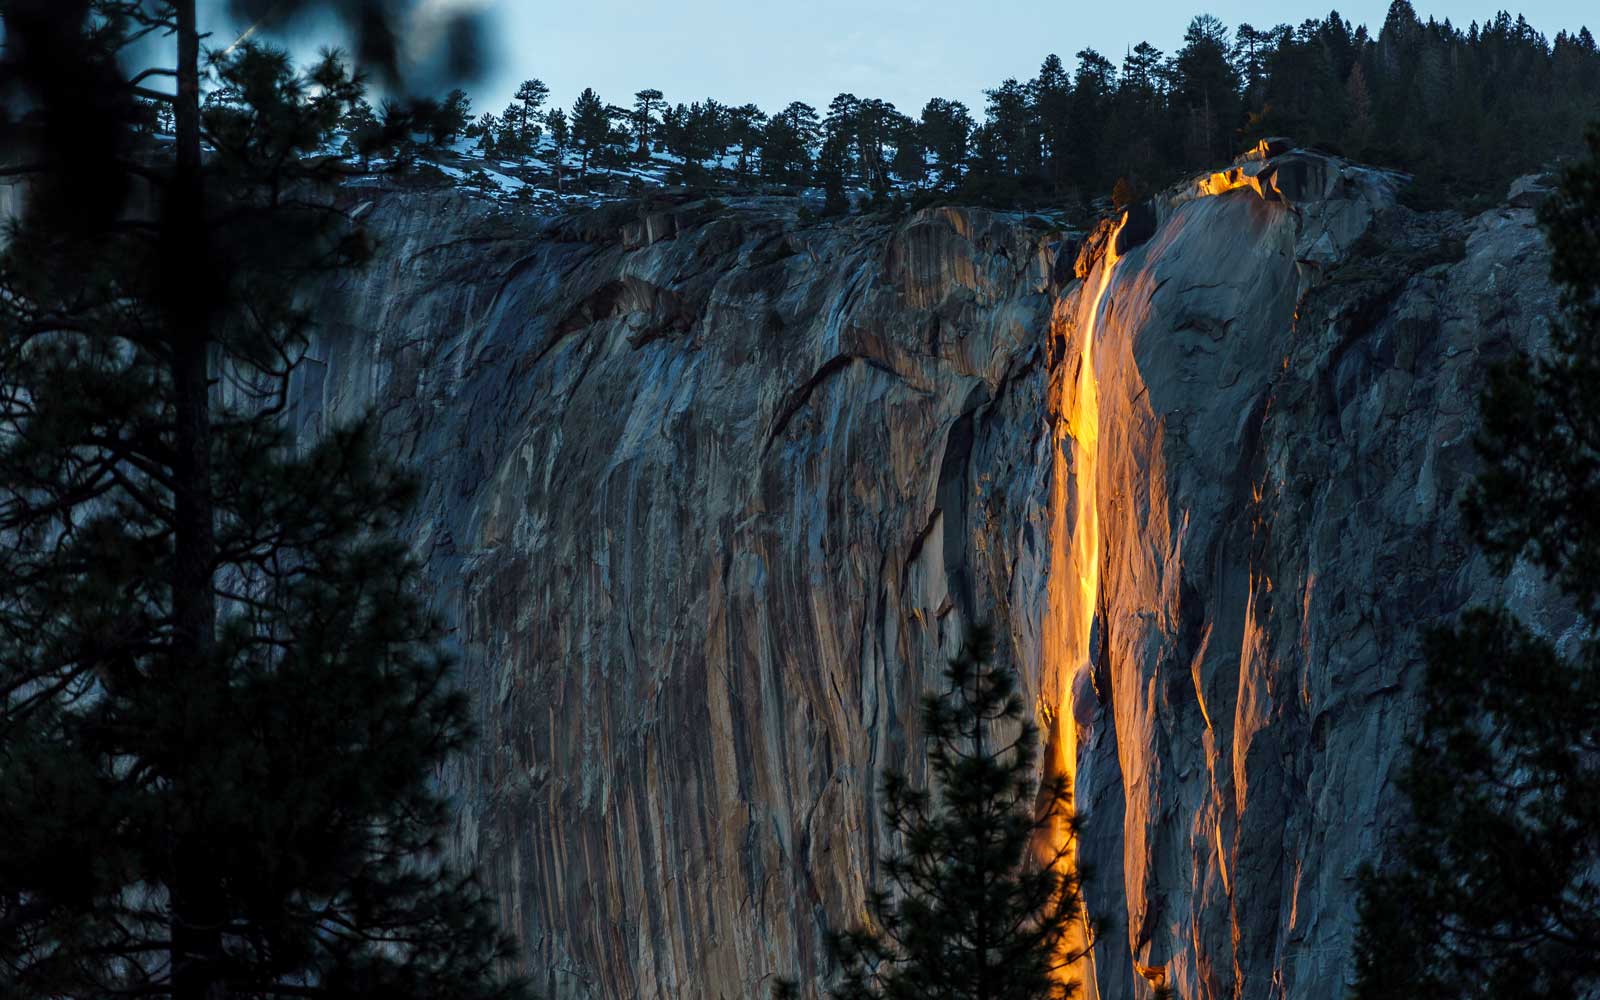 Rare 'Firefall' Makes Its Return to Yosemite For Just a Few Weeks. Travel + Leisure